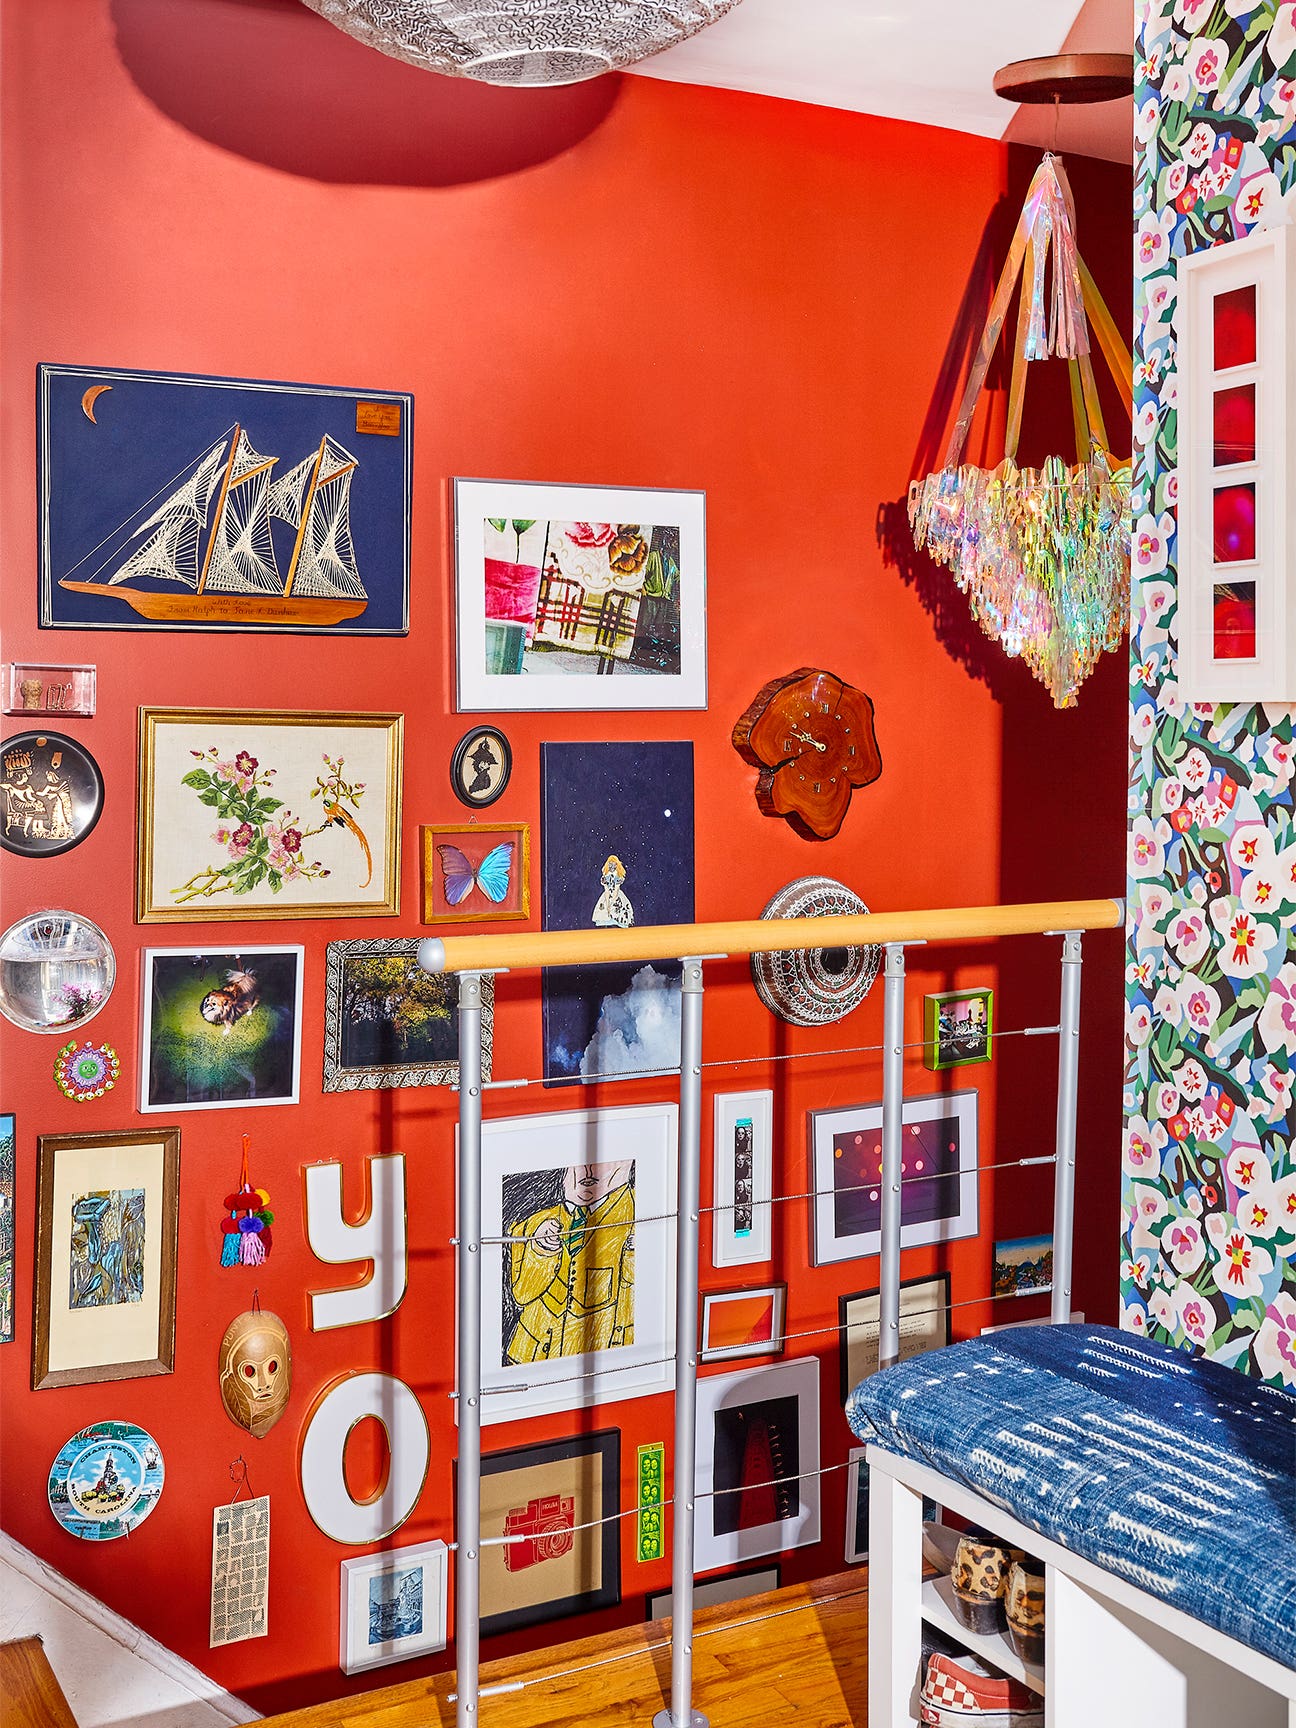 There’s Always Room for More Art in This Maximalist Apartment